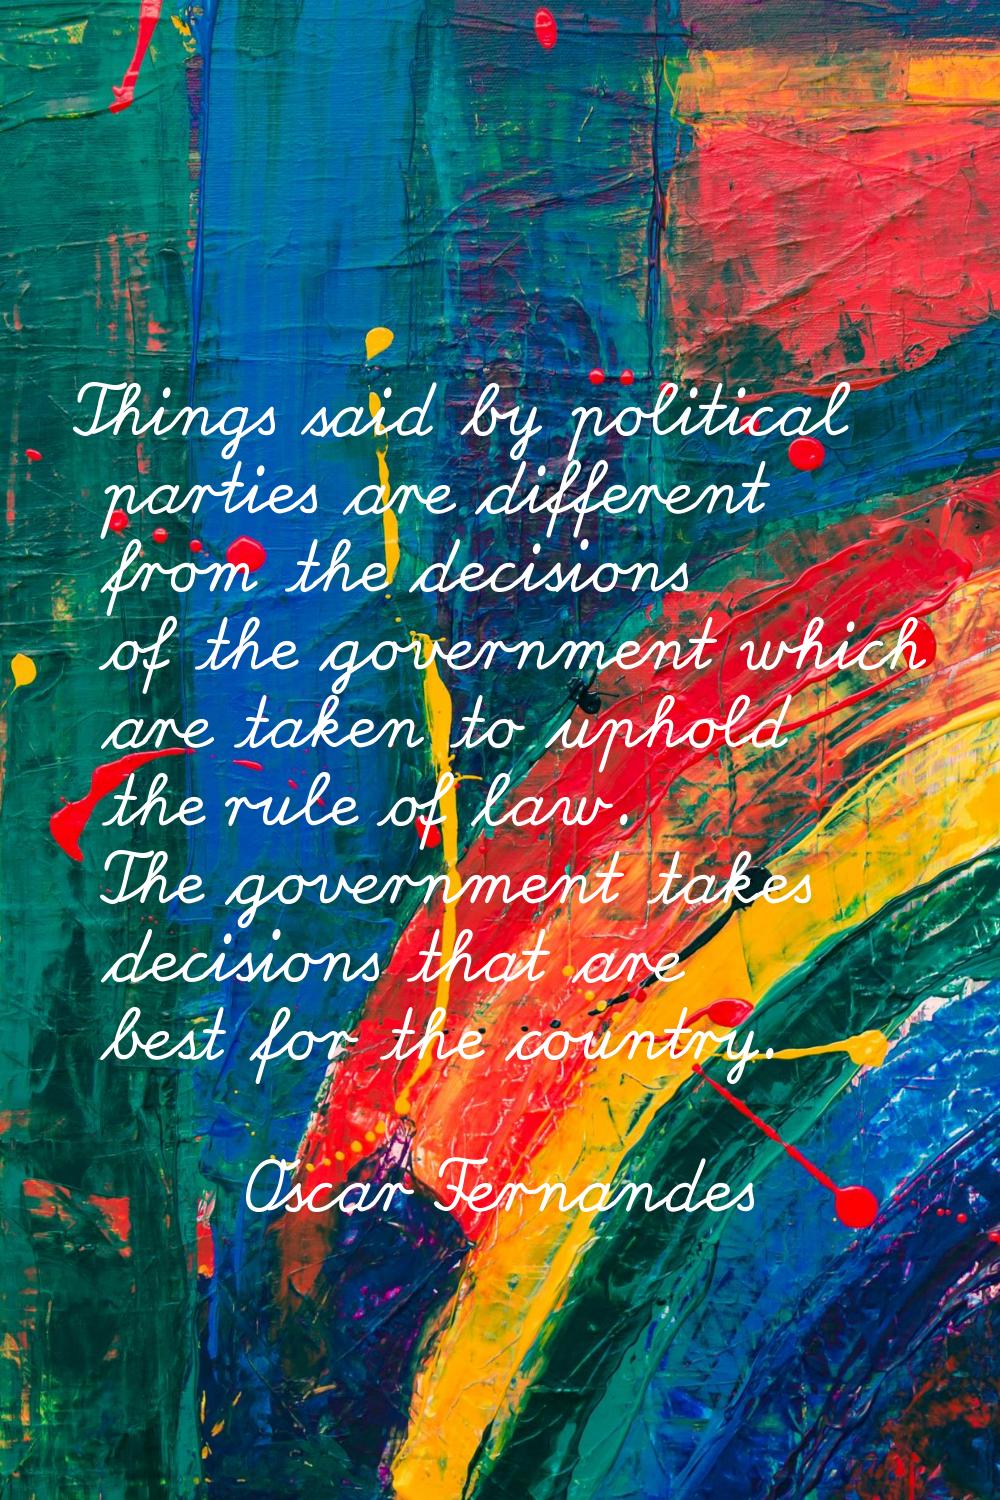 Things said by political parties are different from the decisions of the government which are taken